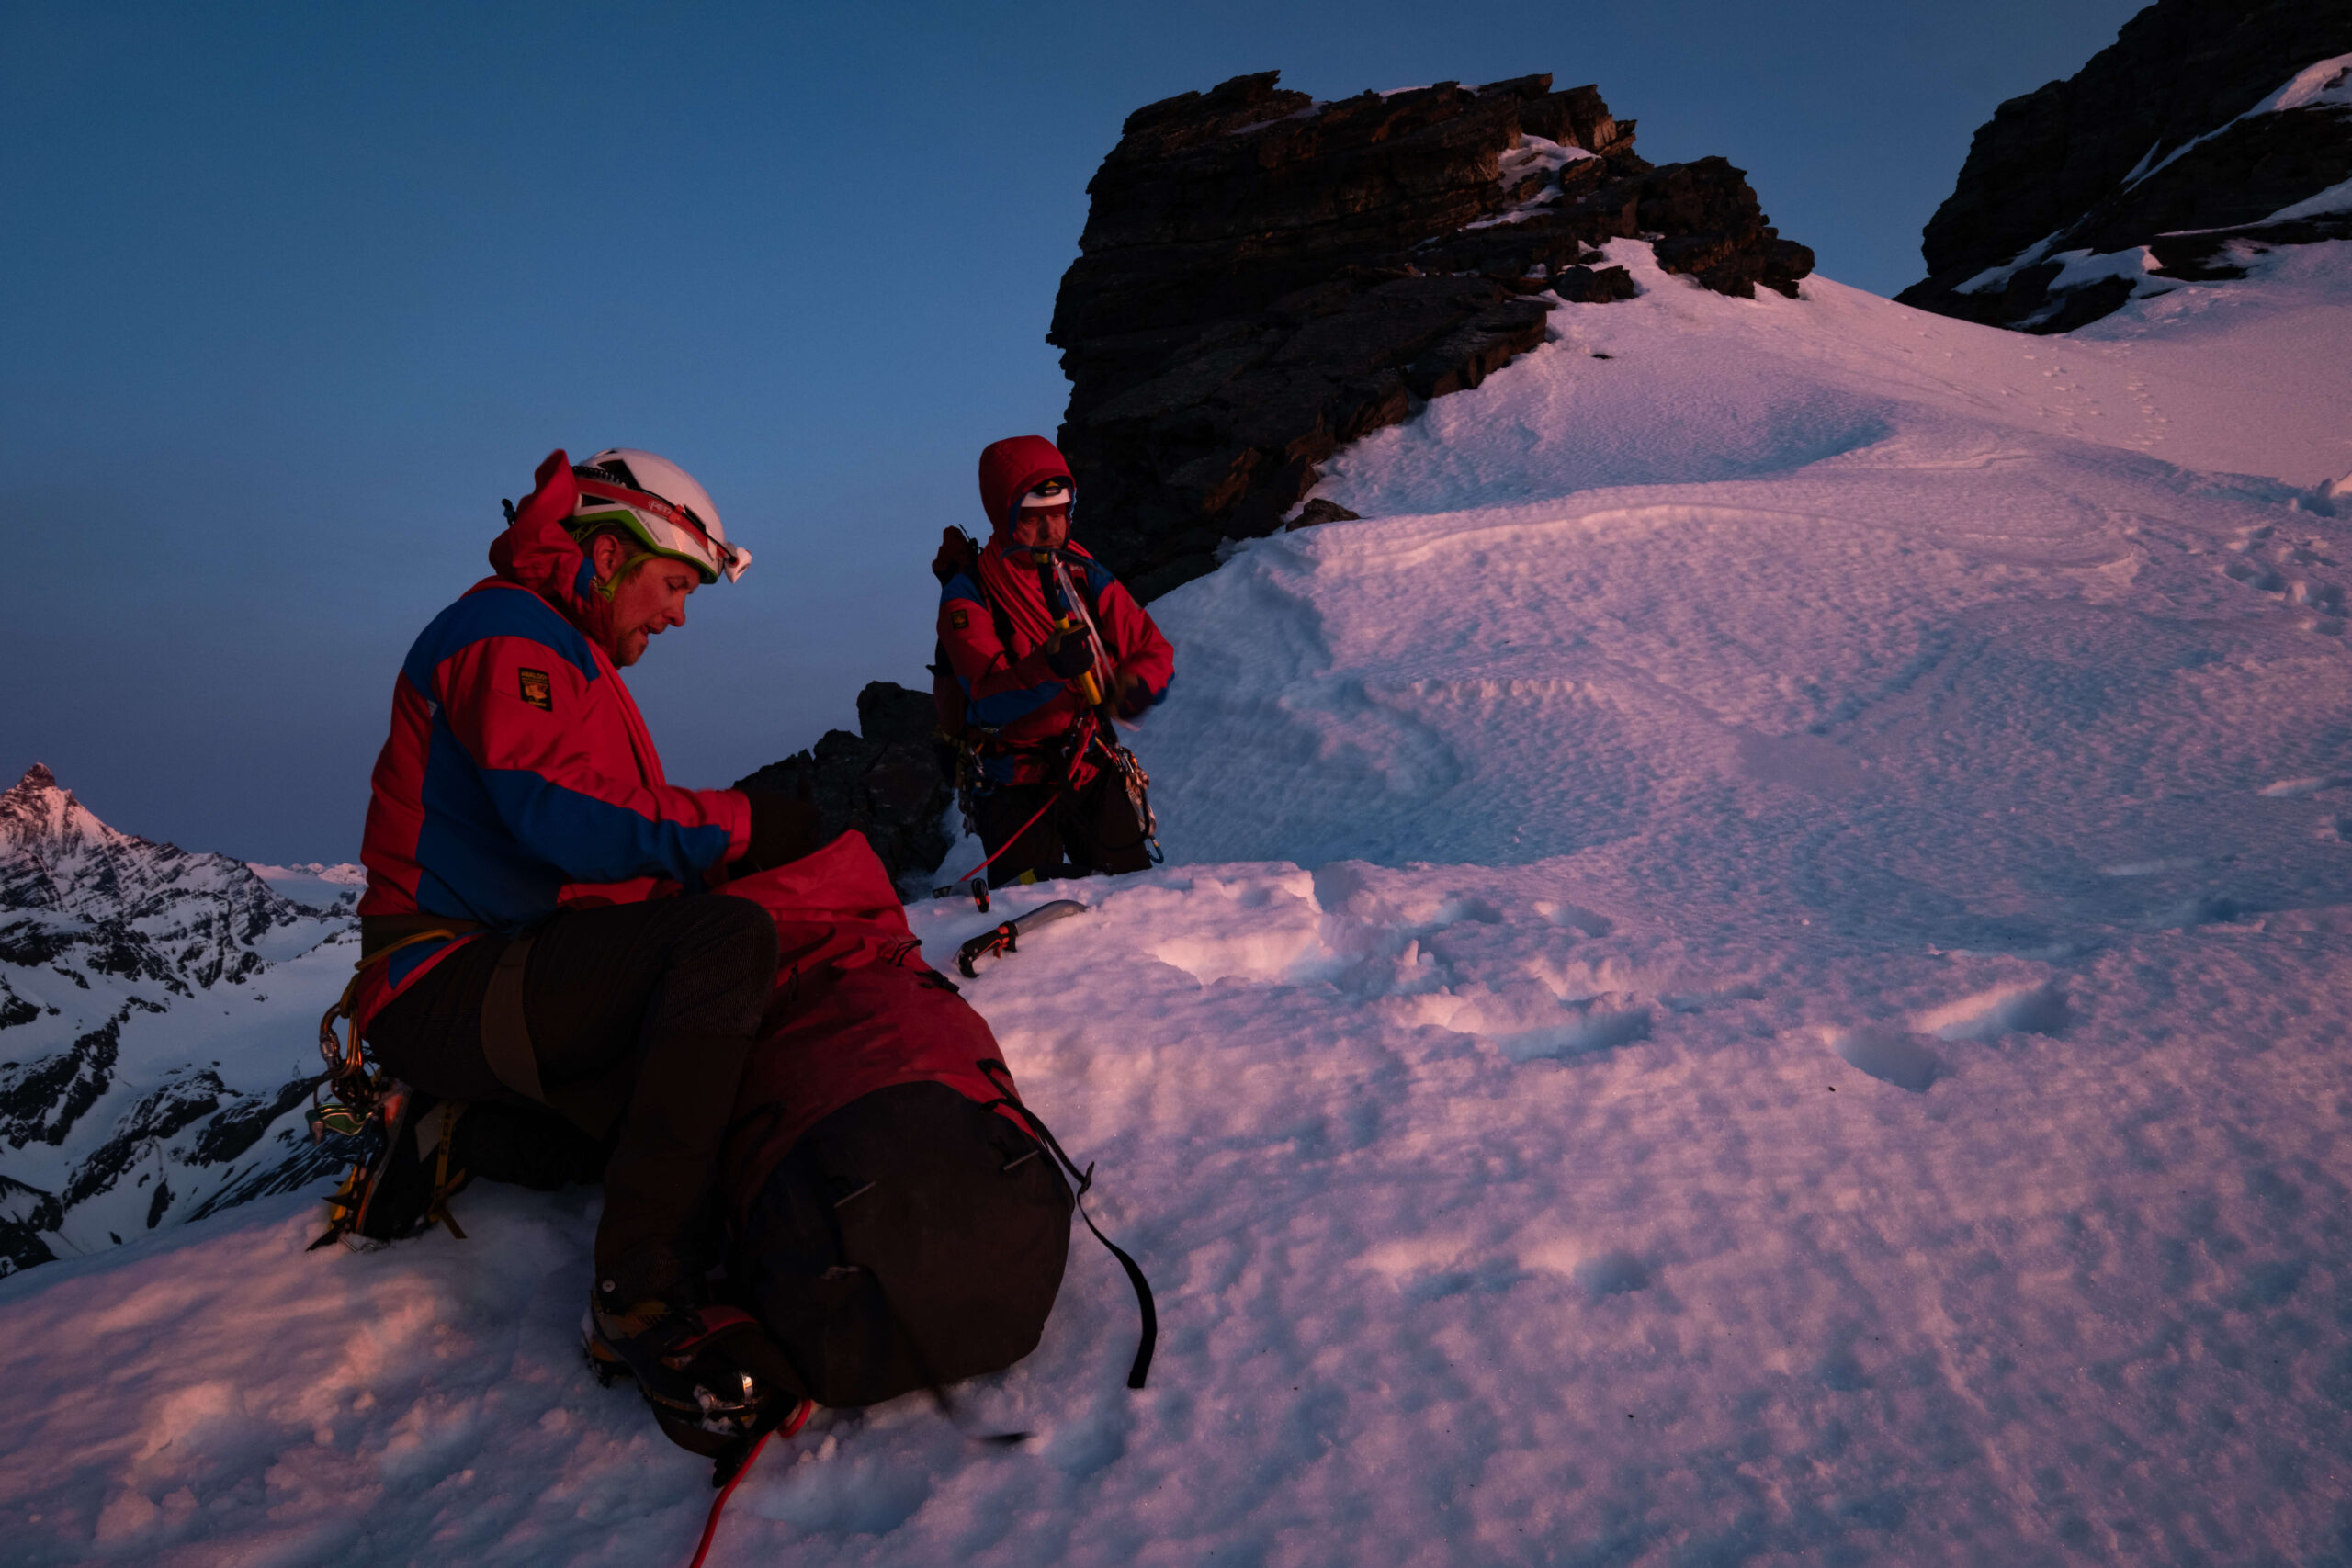 Sunset mountain climb in the snow in Paramo jacket